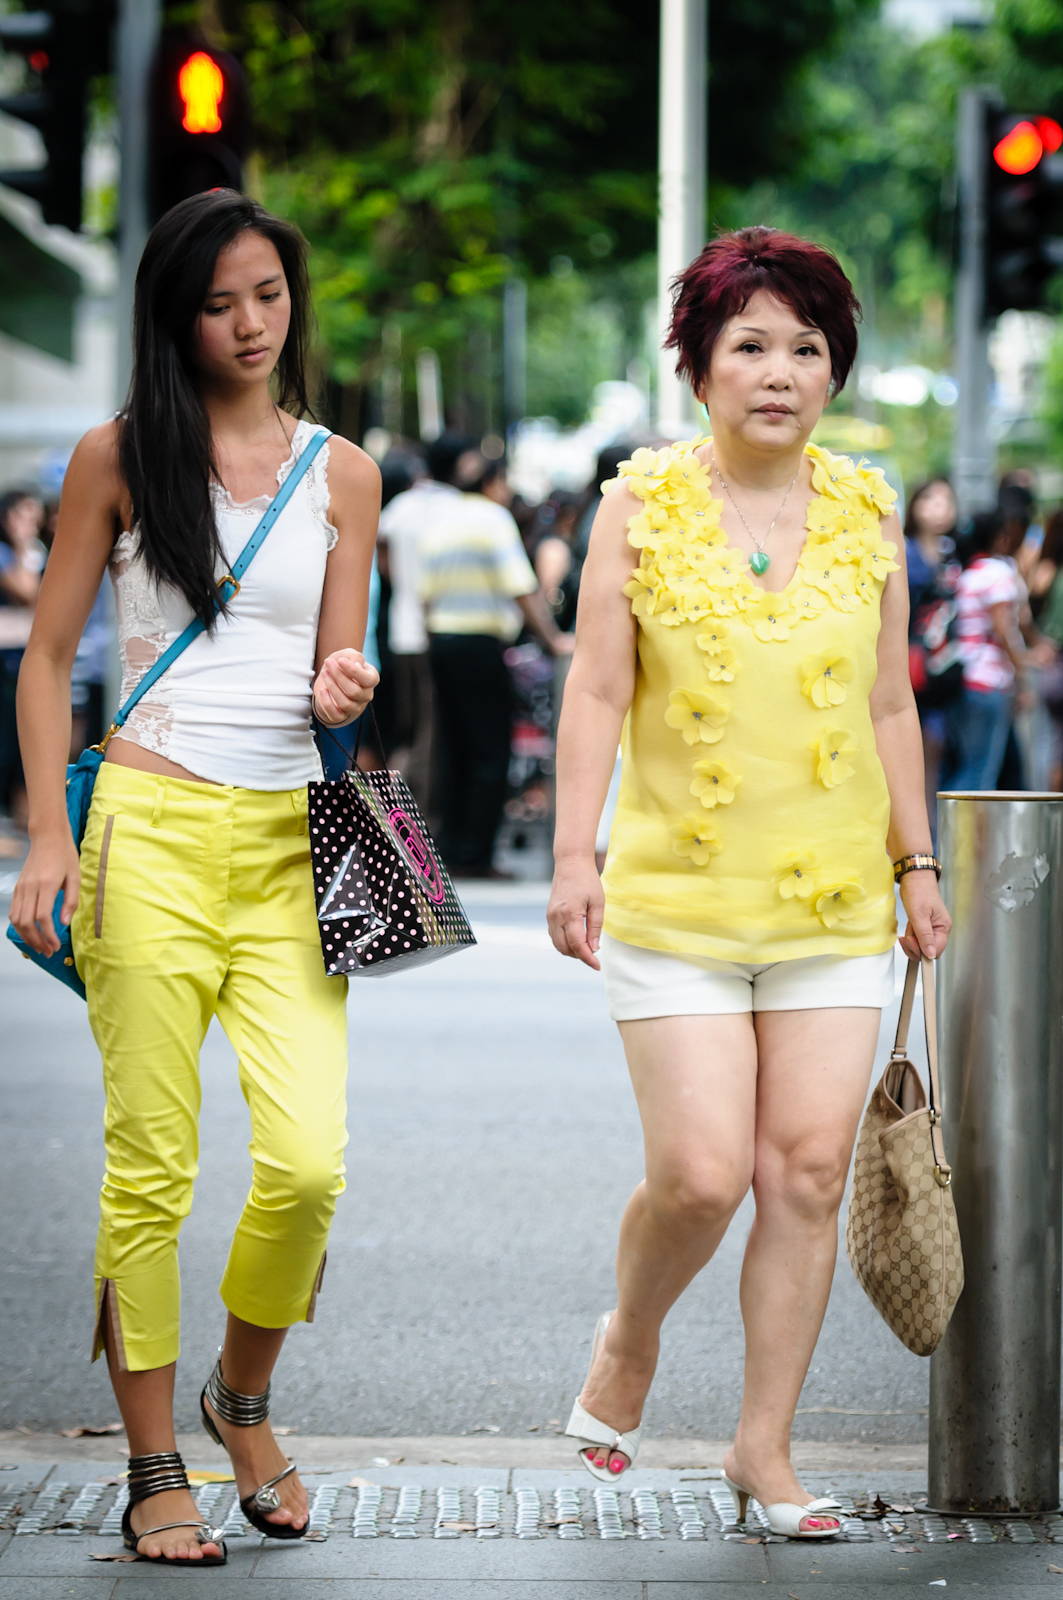 Street photography - Mother and daughter wearing yellow and white